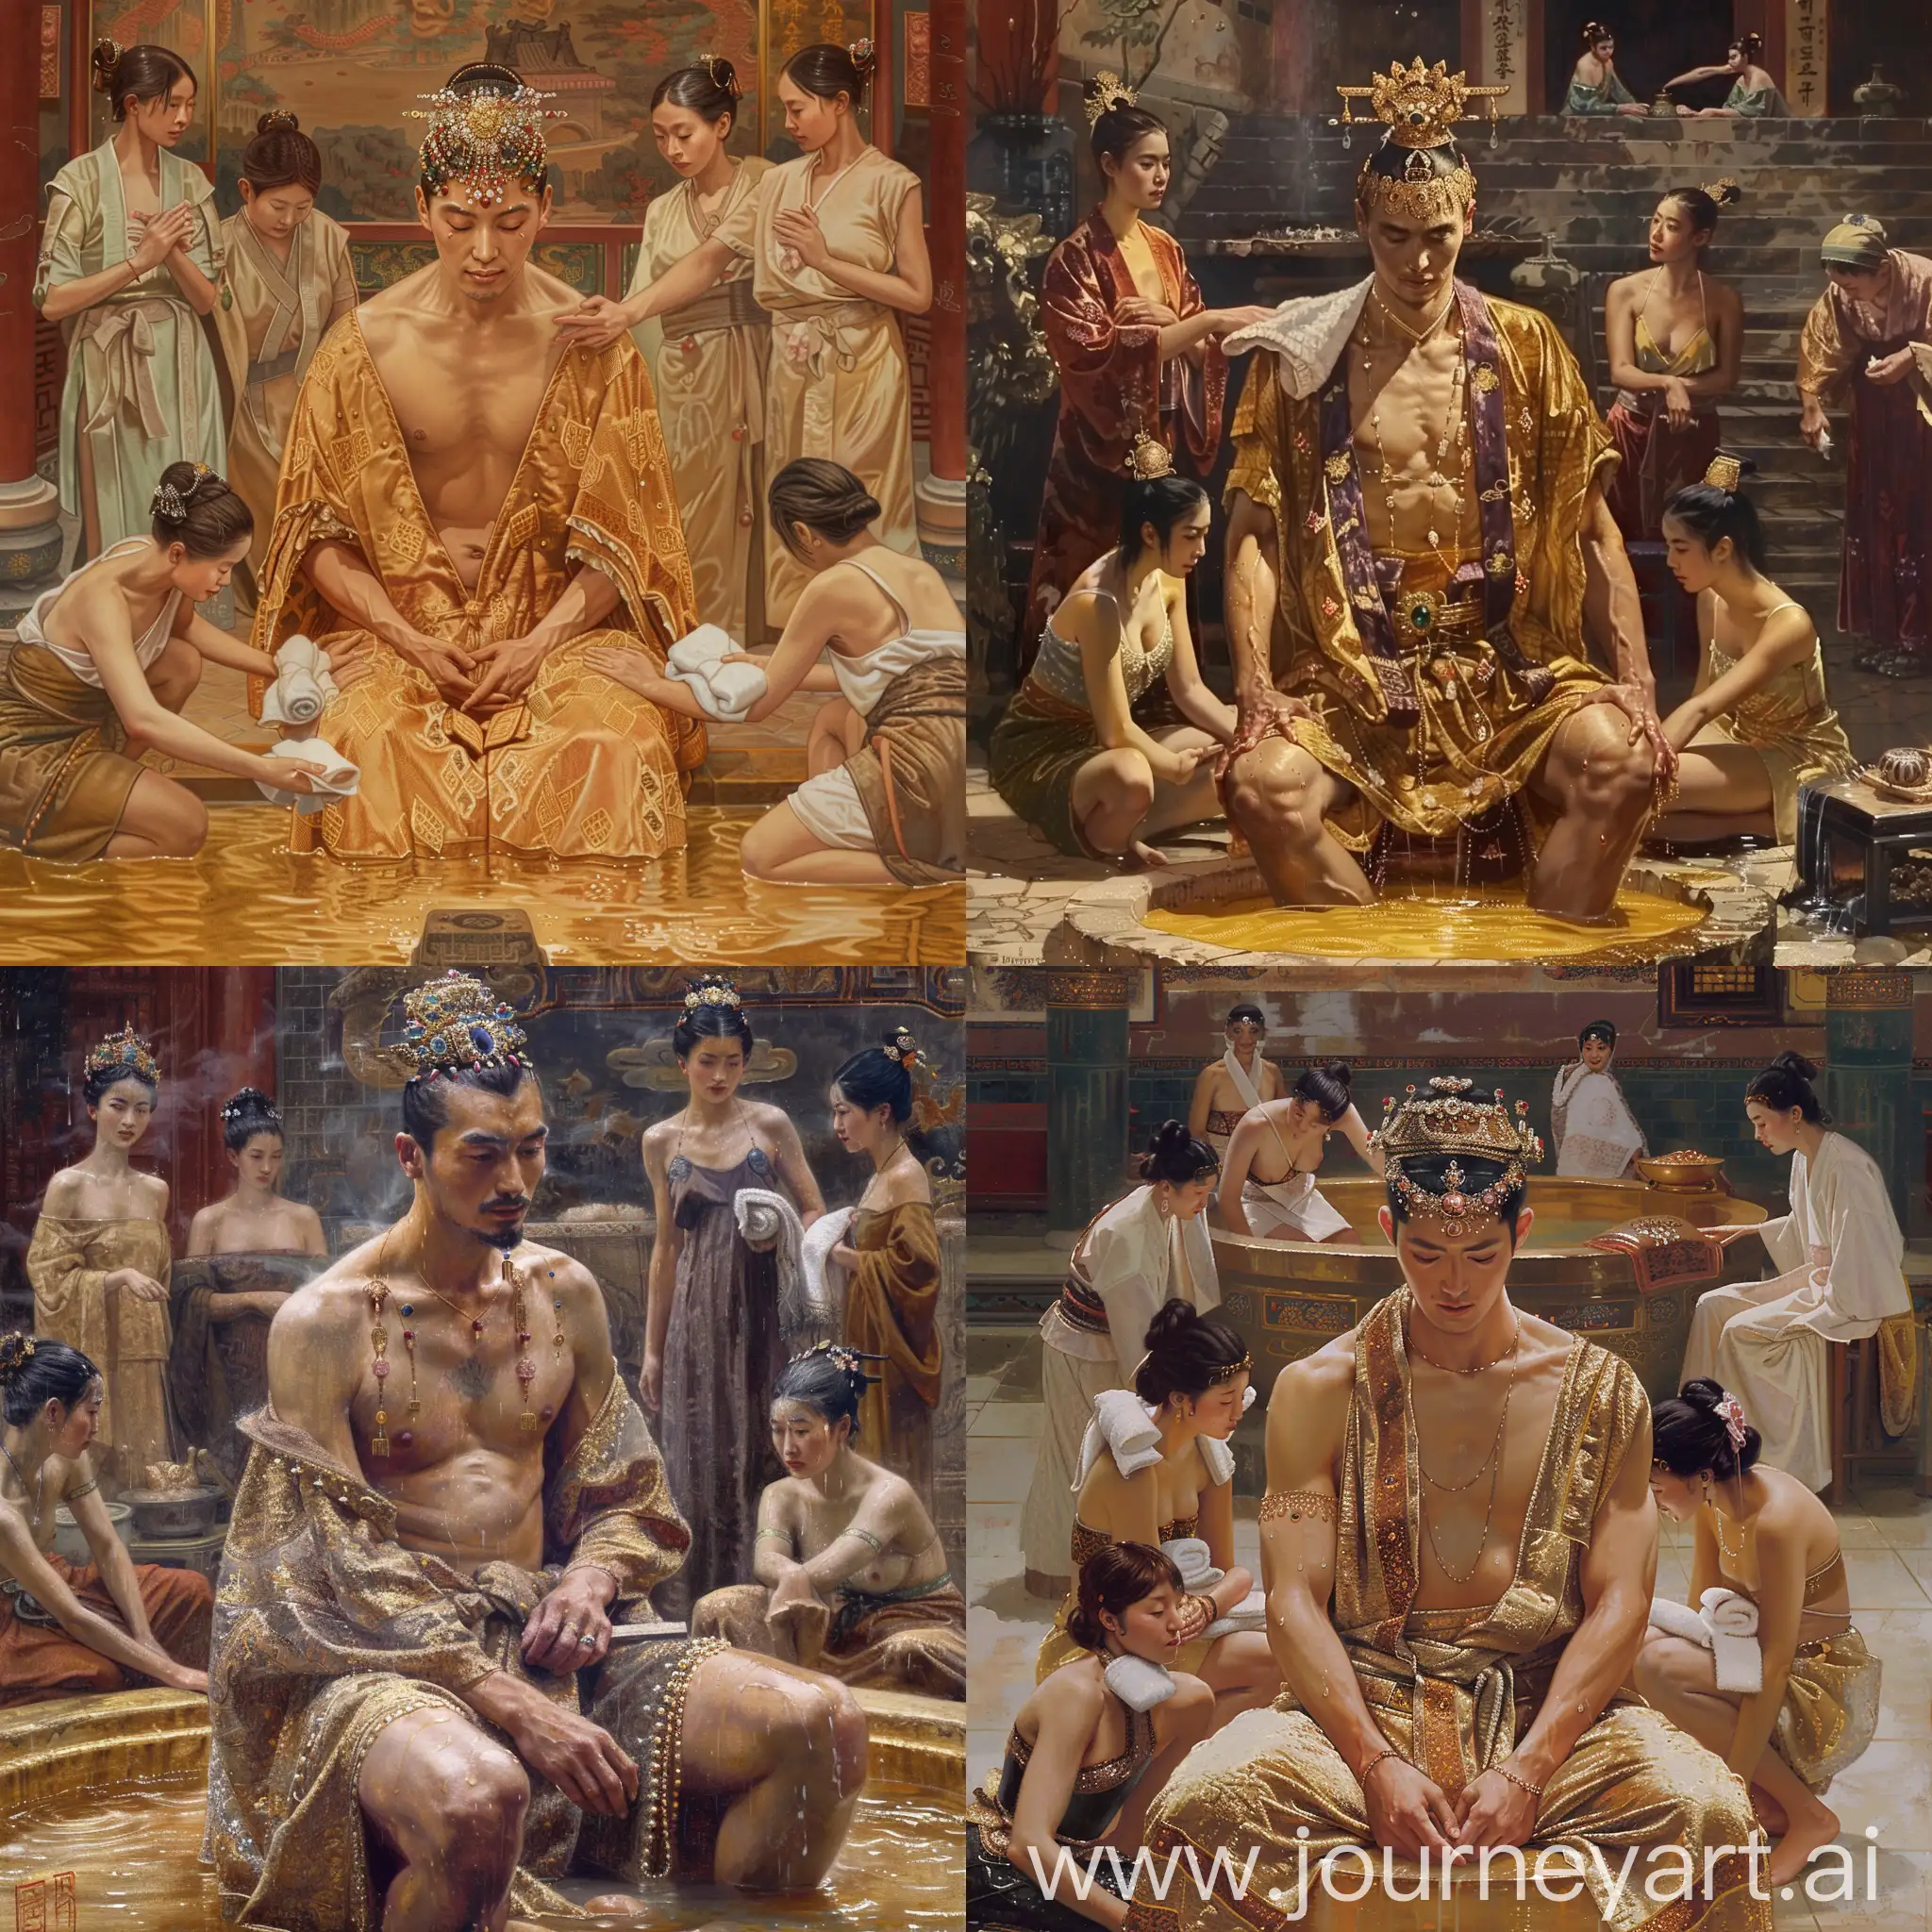 Empress-Wu-Zetian-in-Golden-Hot-Spring-Surrounded-by-Attendants